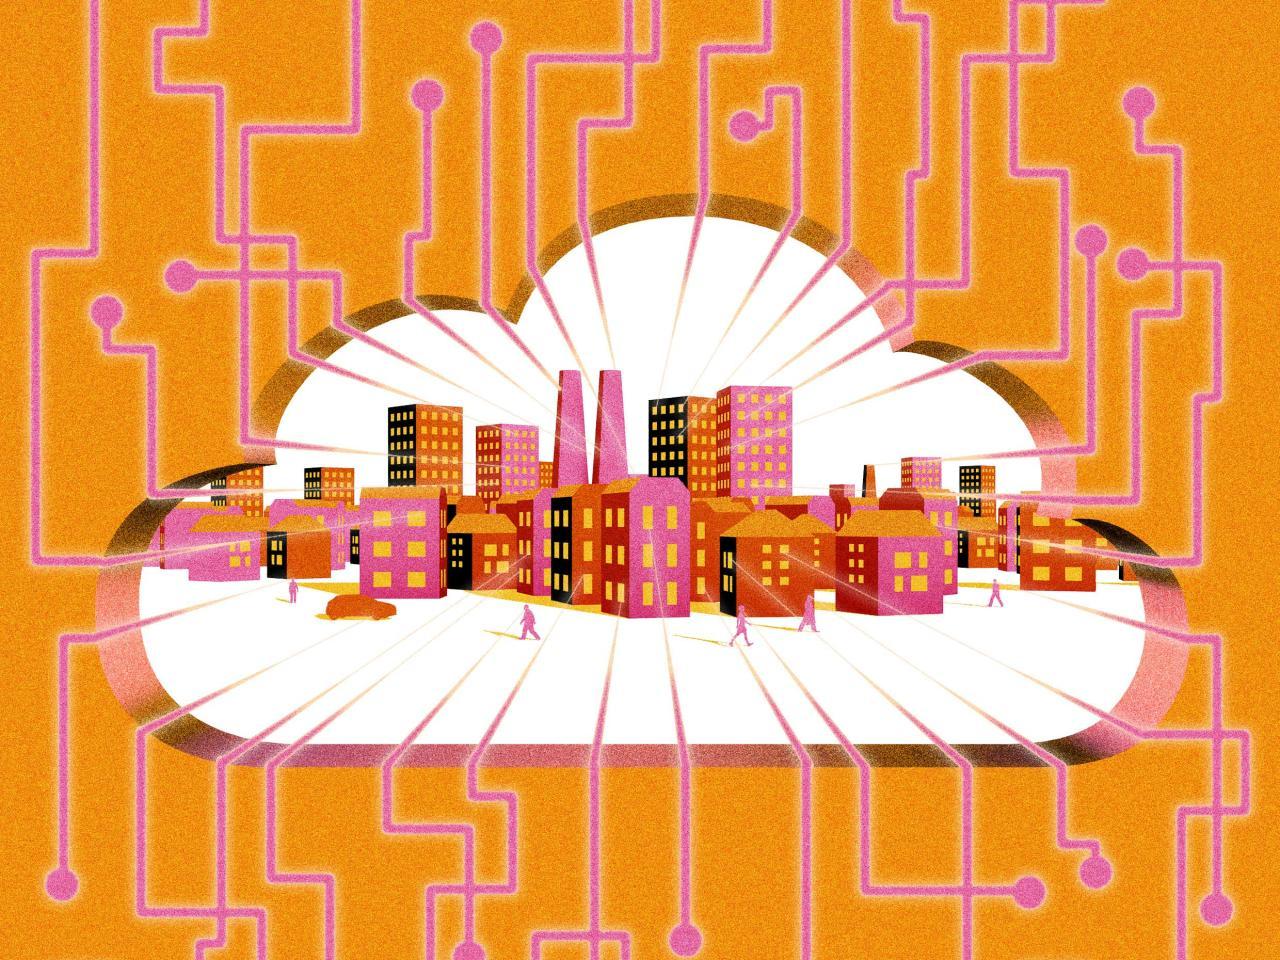 pink circuit board wiring connecting to a pink and orange city in a cloud